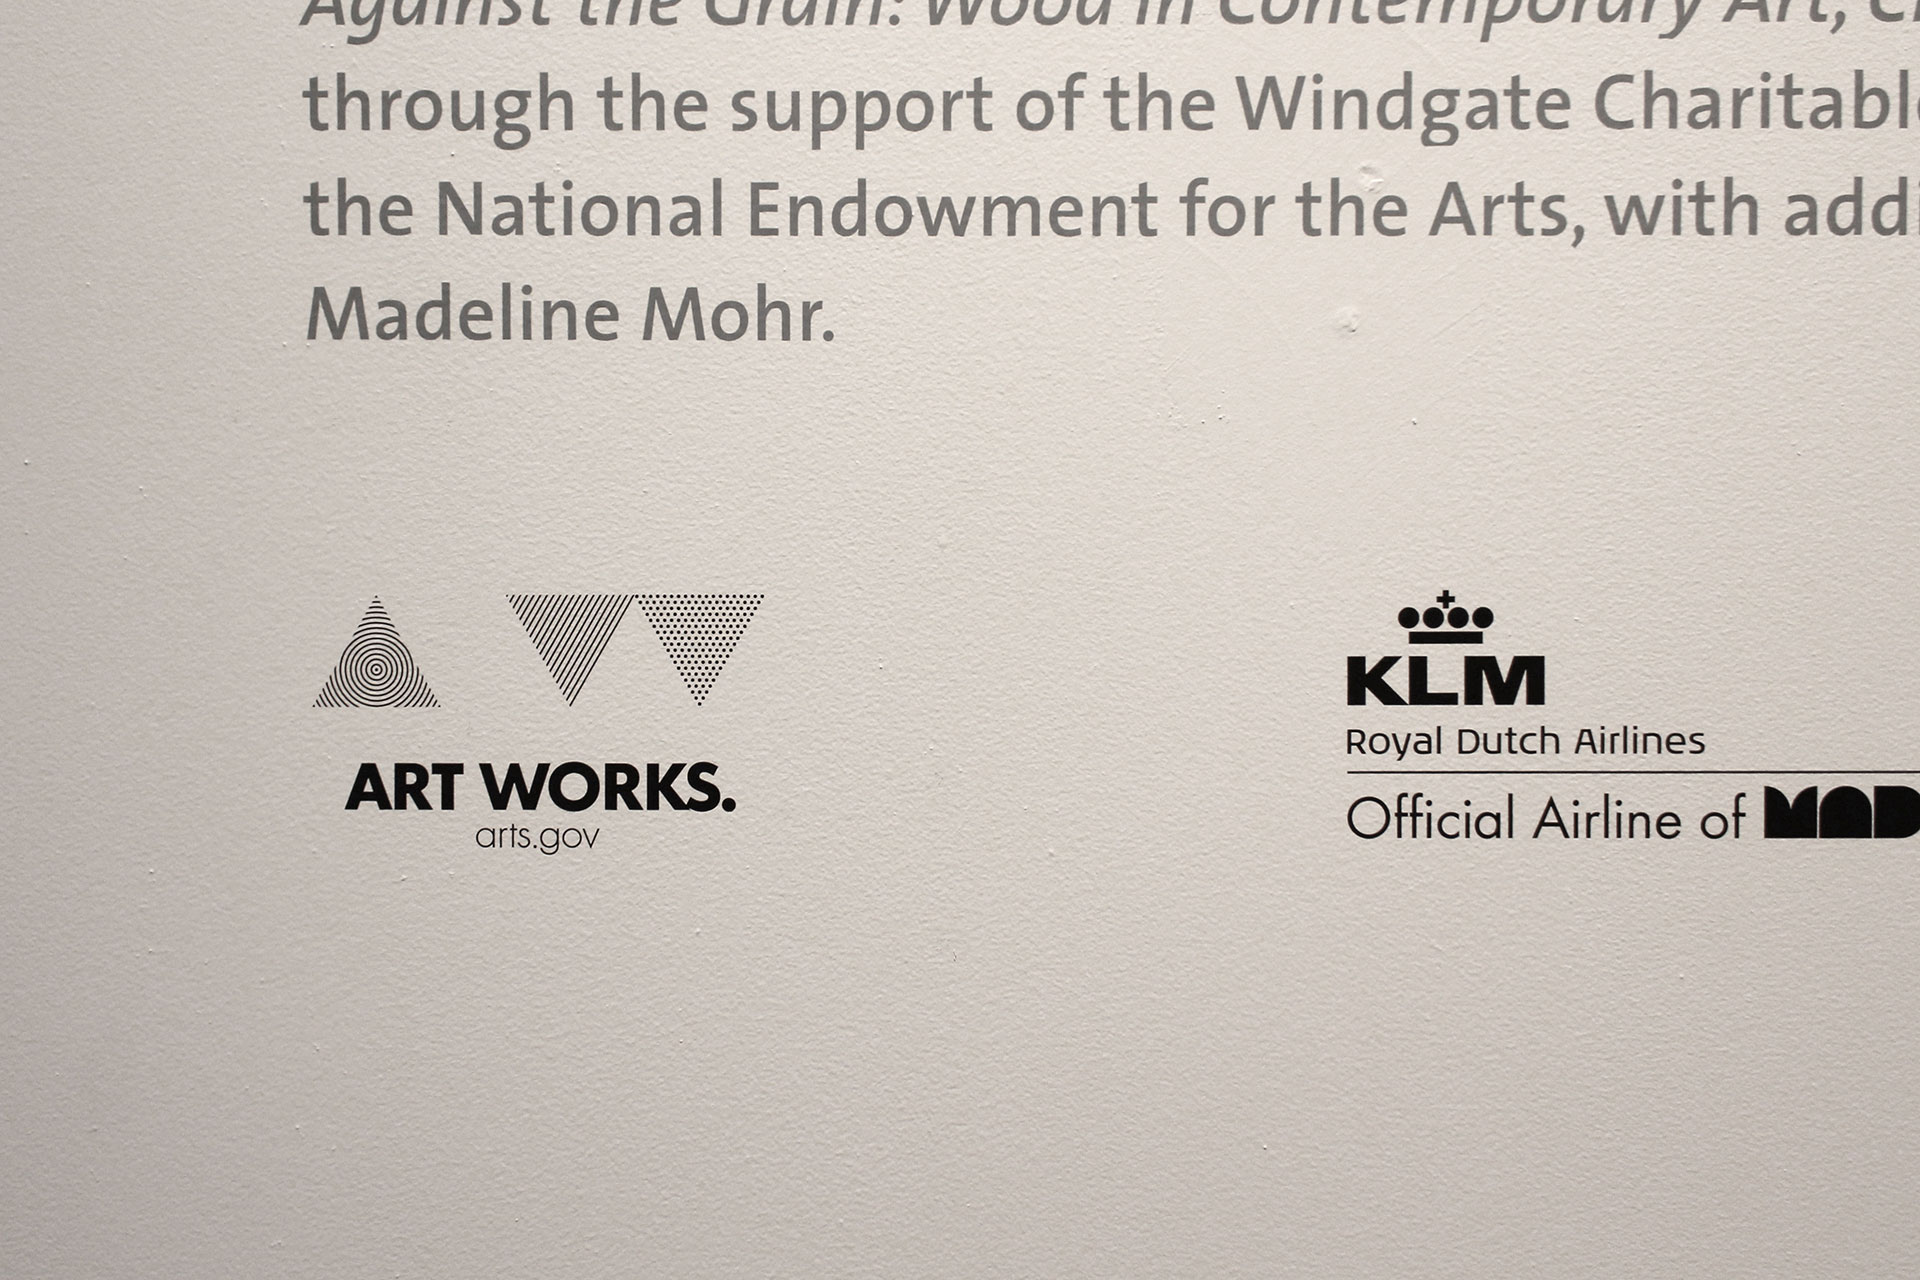 US National Endowment for the Arts